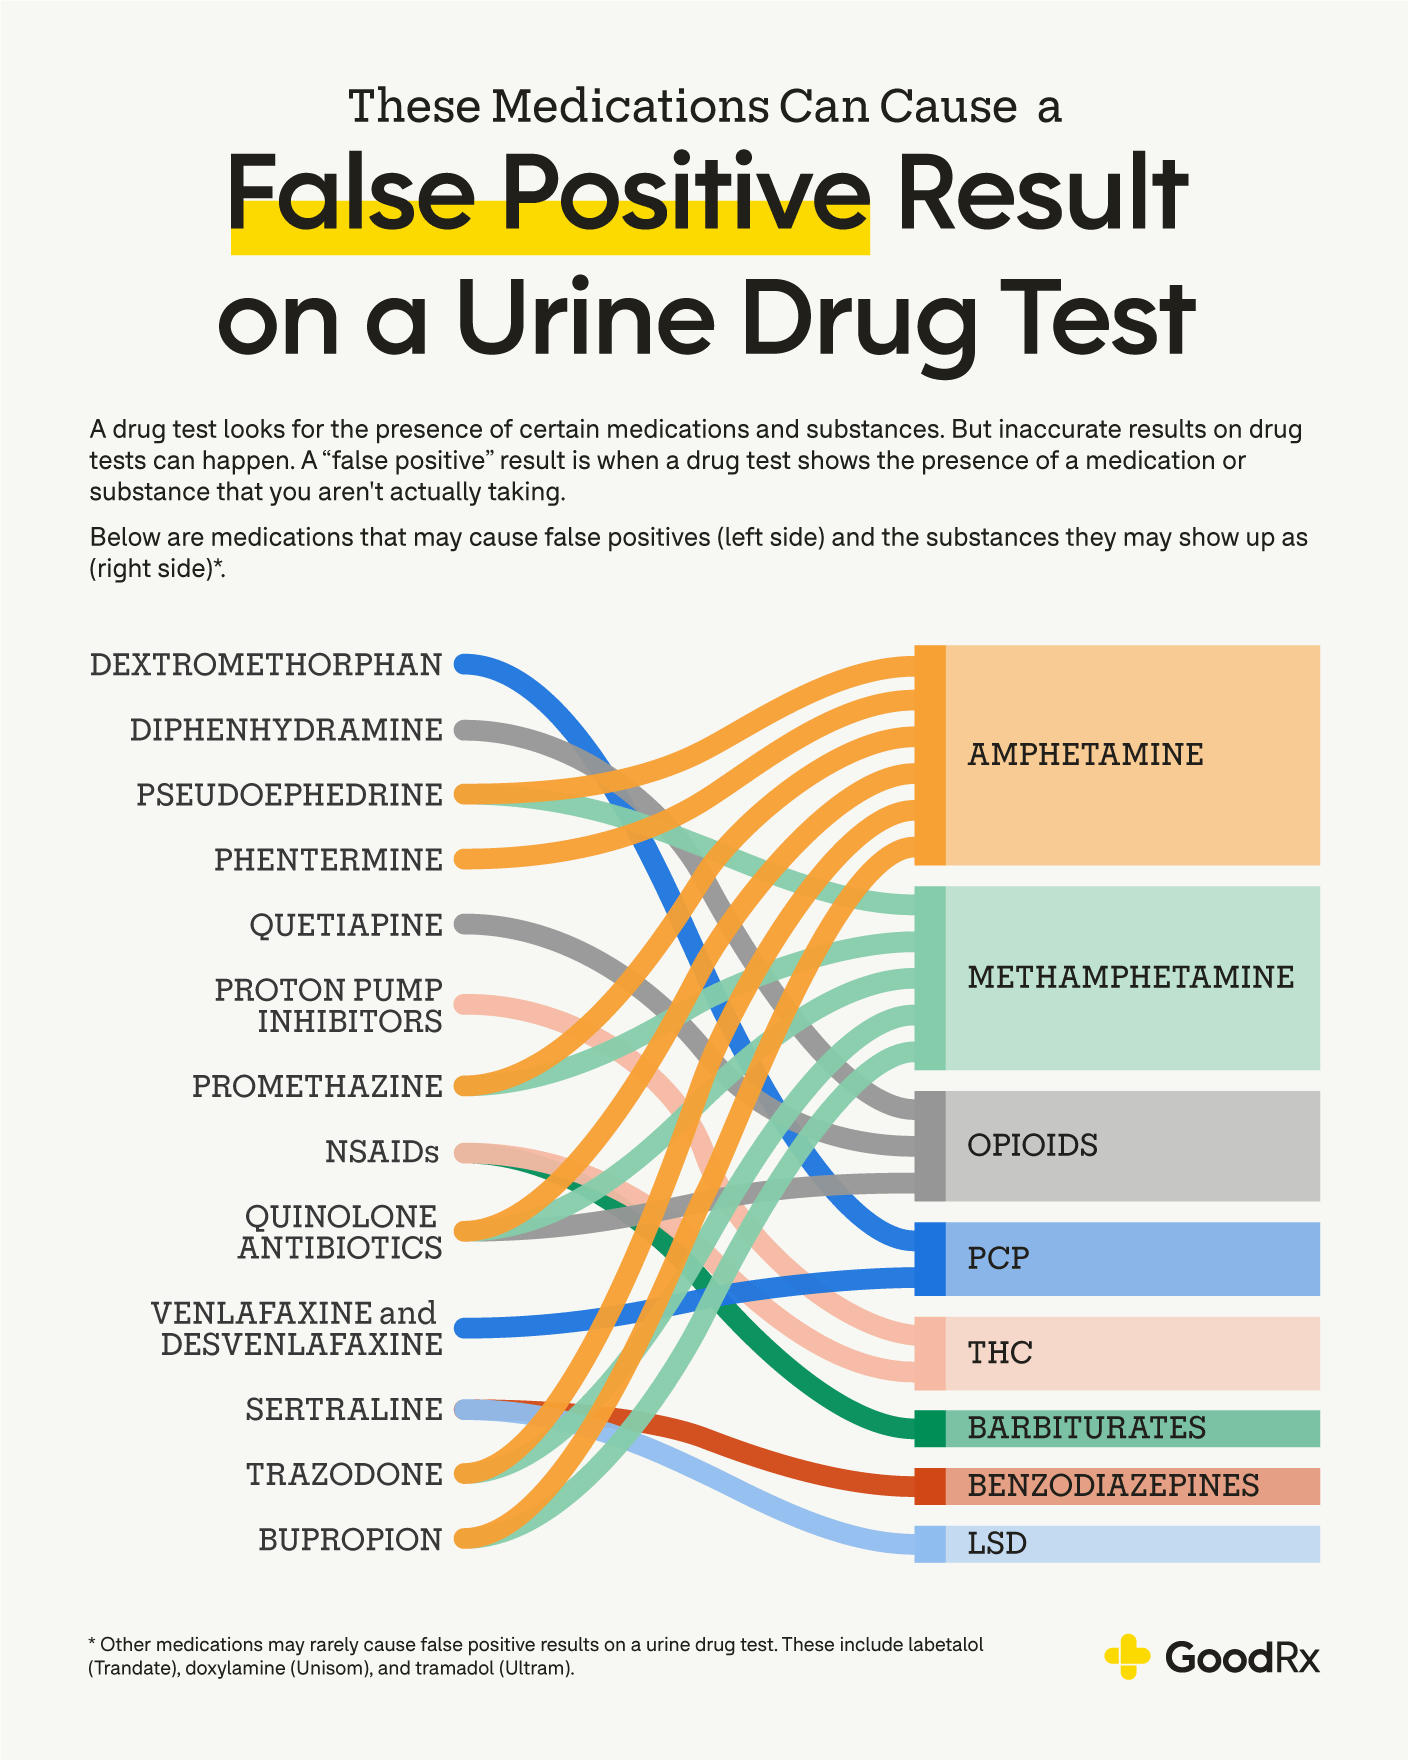 Does Wellbutrin Show Up on a Drug Test?